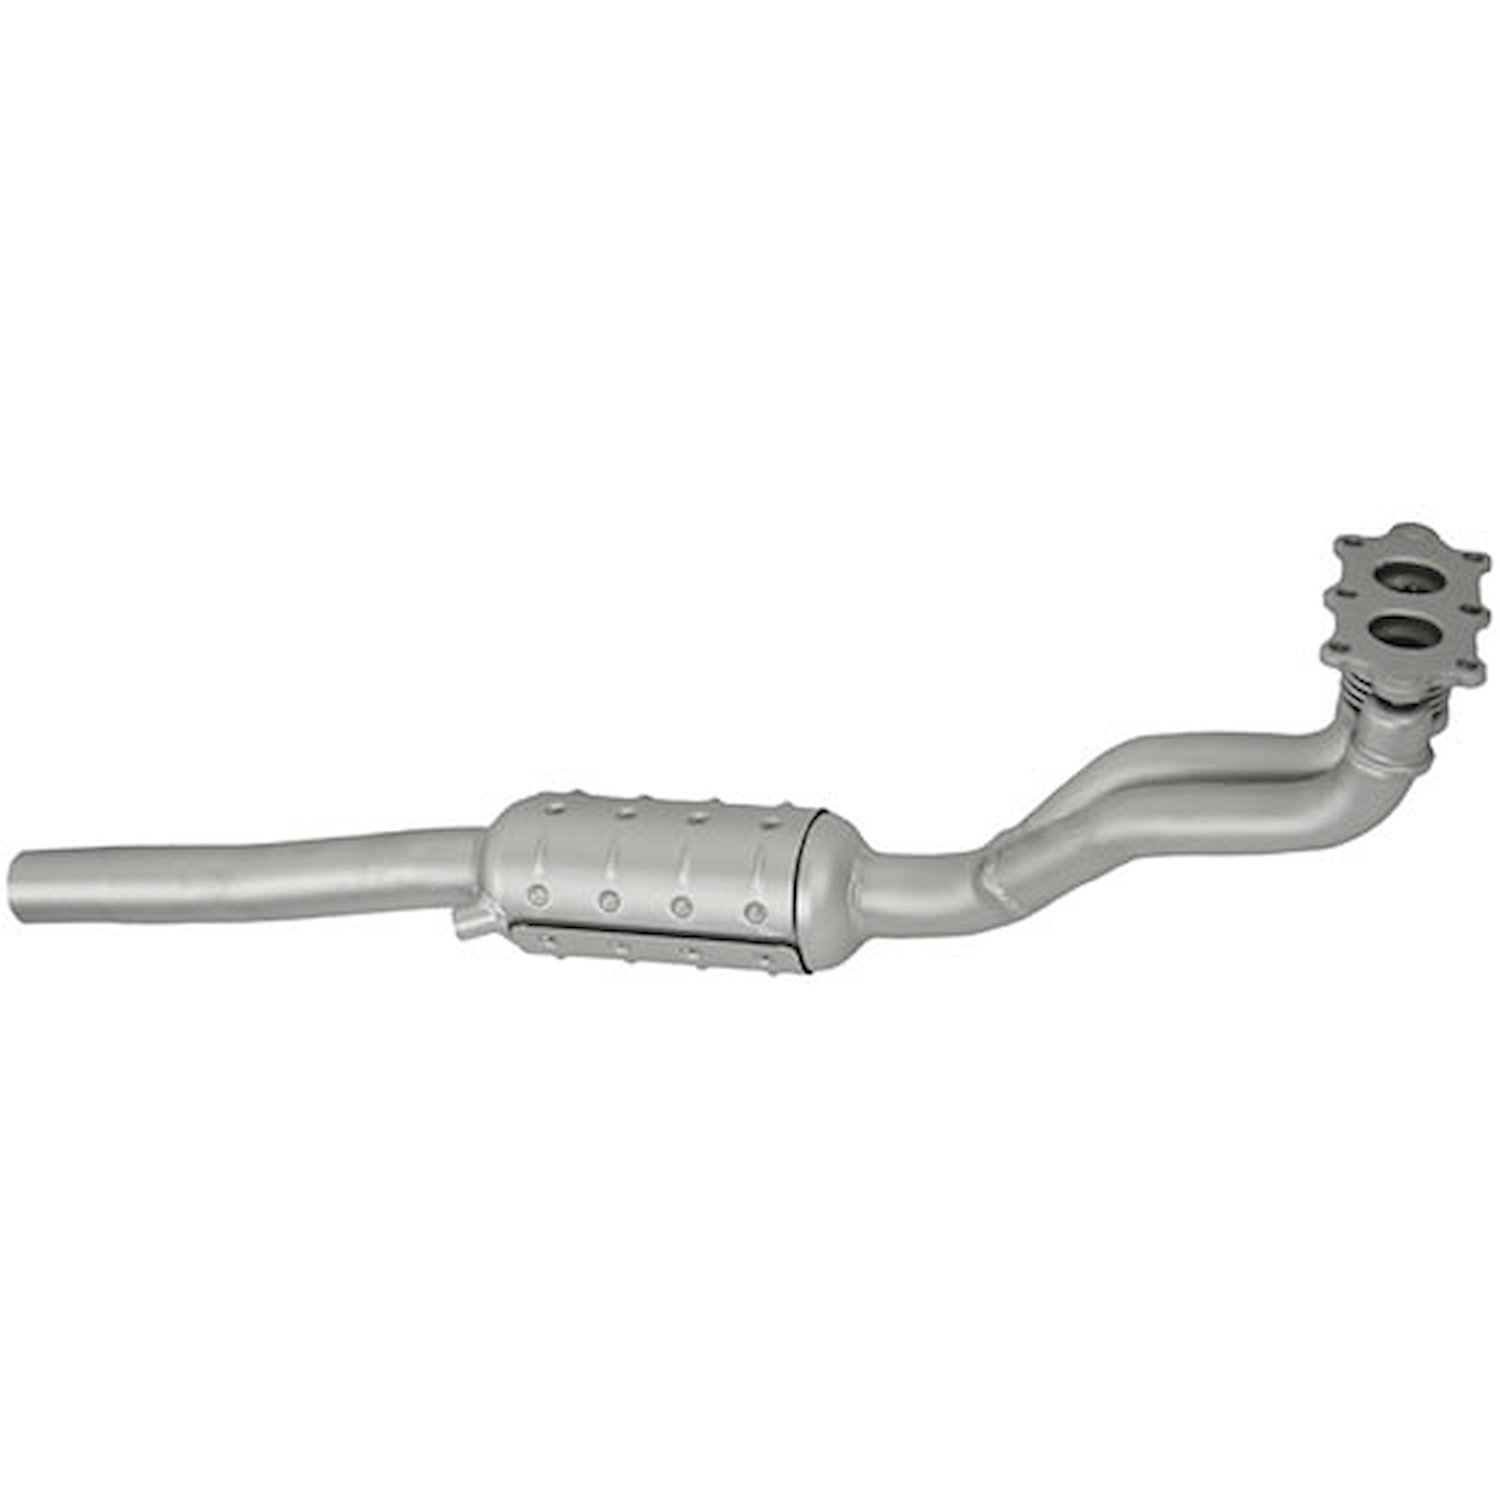 Pacesetter Direct-Fit Catalytic Converter. Direct Replacement of OEM, Stainless Steel Construction, Low Restriction Design